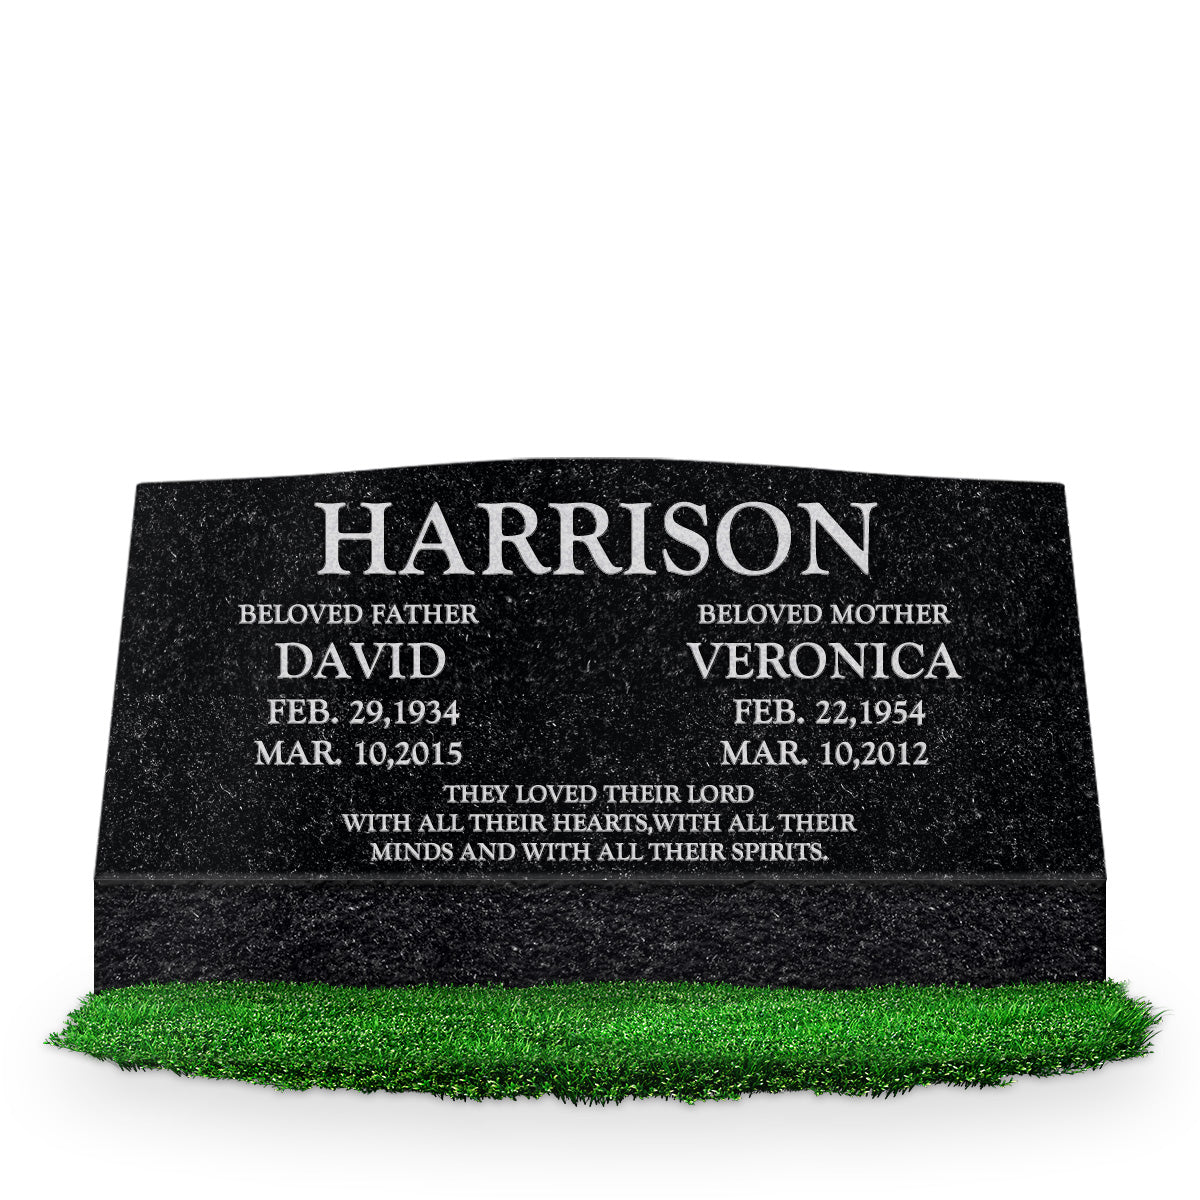 36″ x 10″ x 16″ Serp Top Slant Headstone: polished front and back; Companion/Text